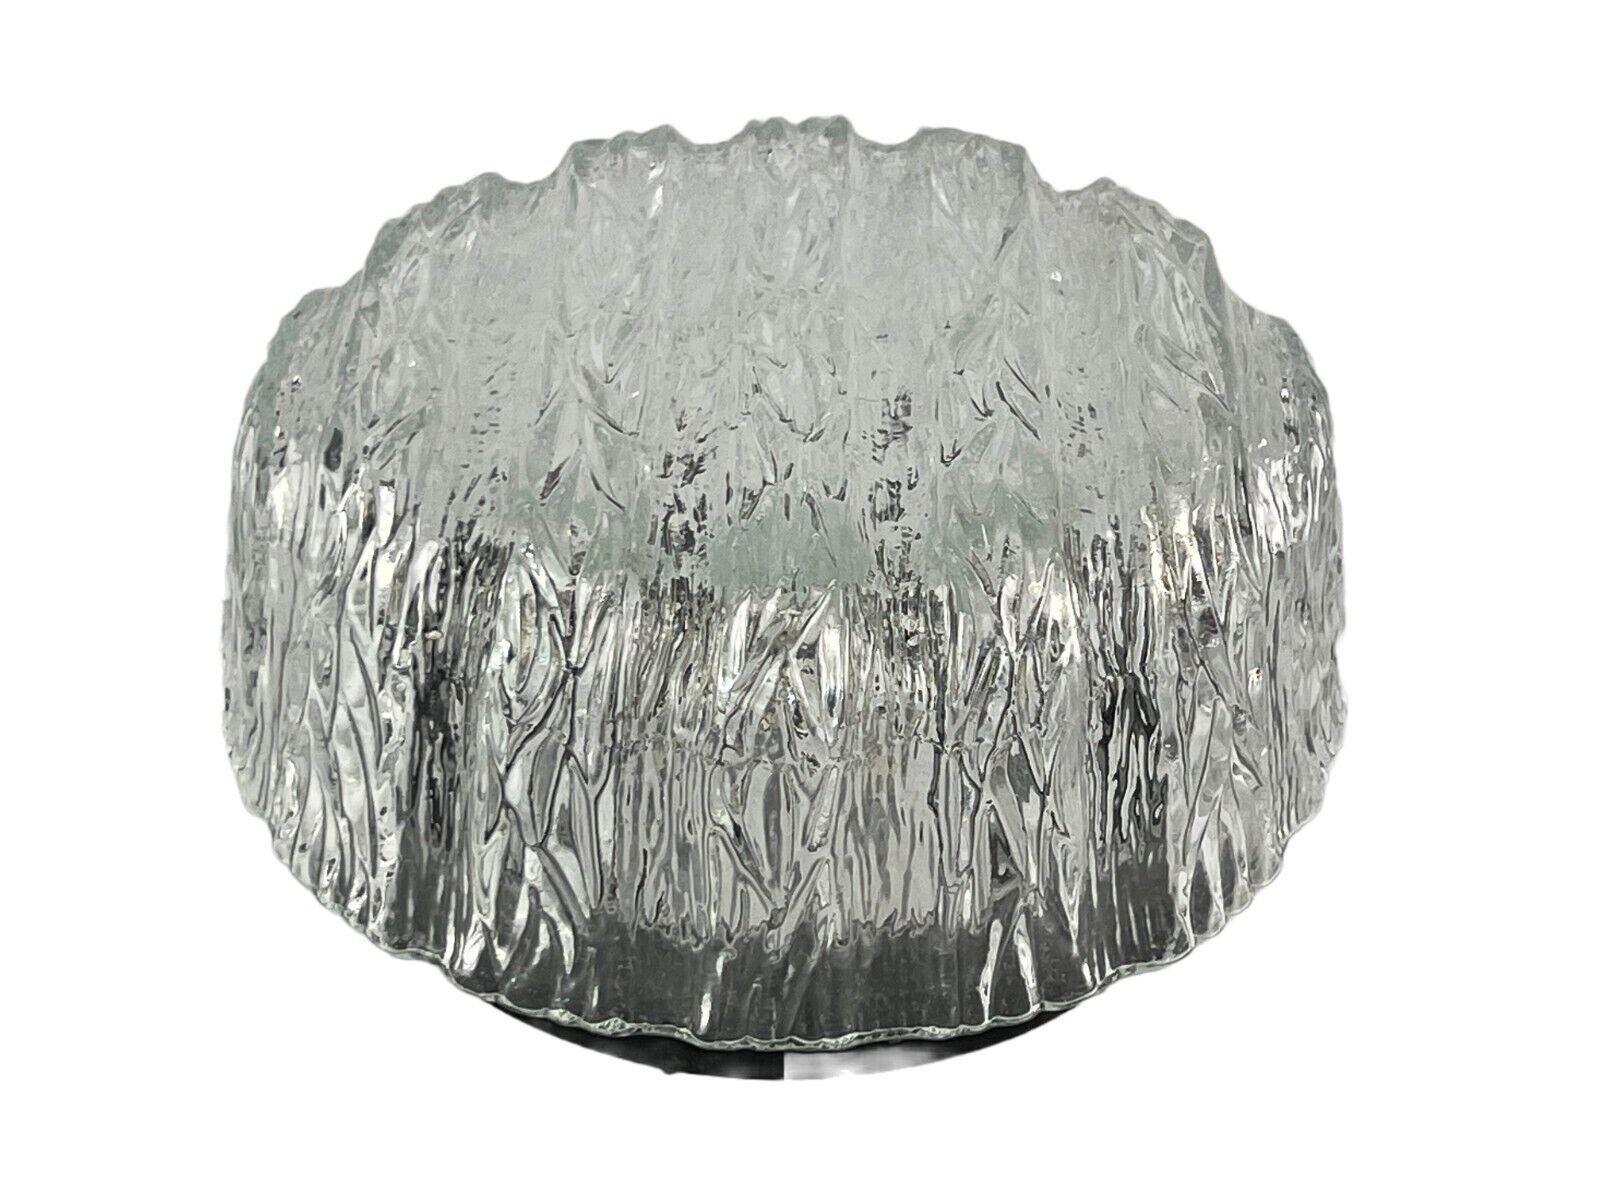 60s 70s ceiling lamp Plafoniere Flush Mount Glass Space Age Design 60s 70s

Object: plafoniere

Manufacturer: RZB

Condition: good

Age: around 1960-1970

Dimensions:

Diameter = 21cm
Height = 11cm

Other notes:

E27 socket

The